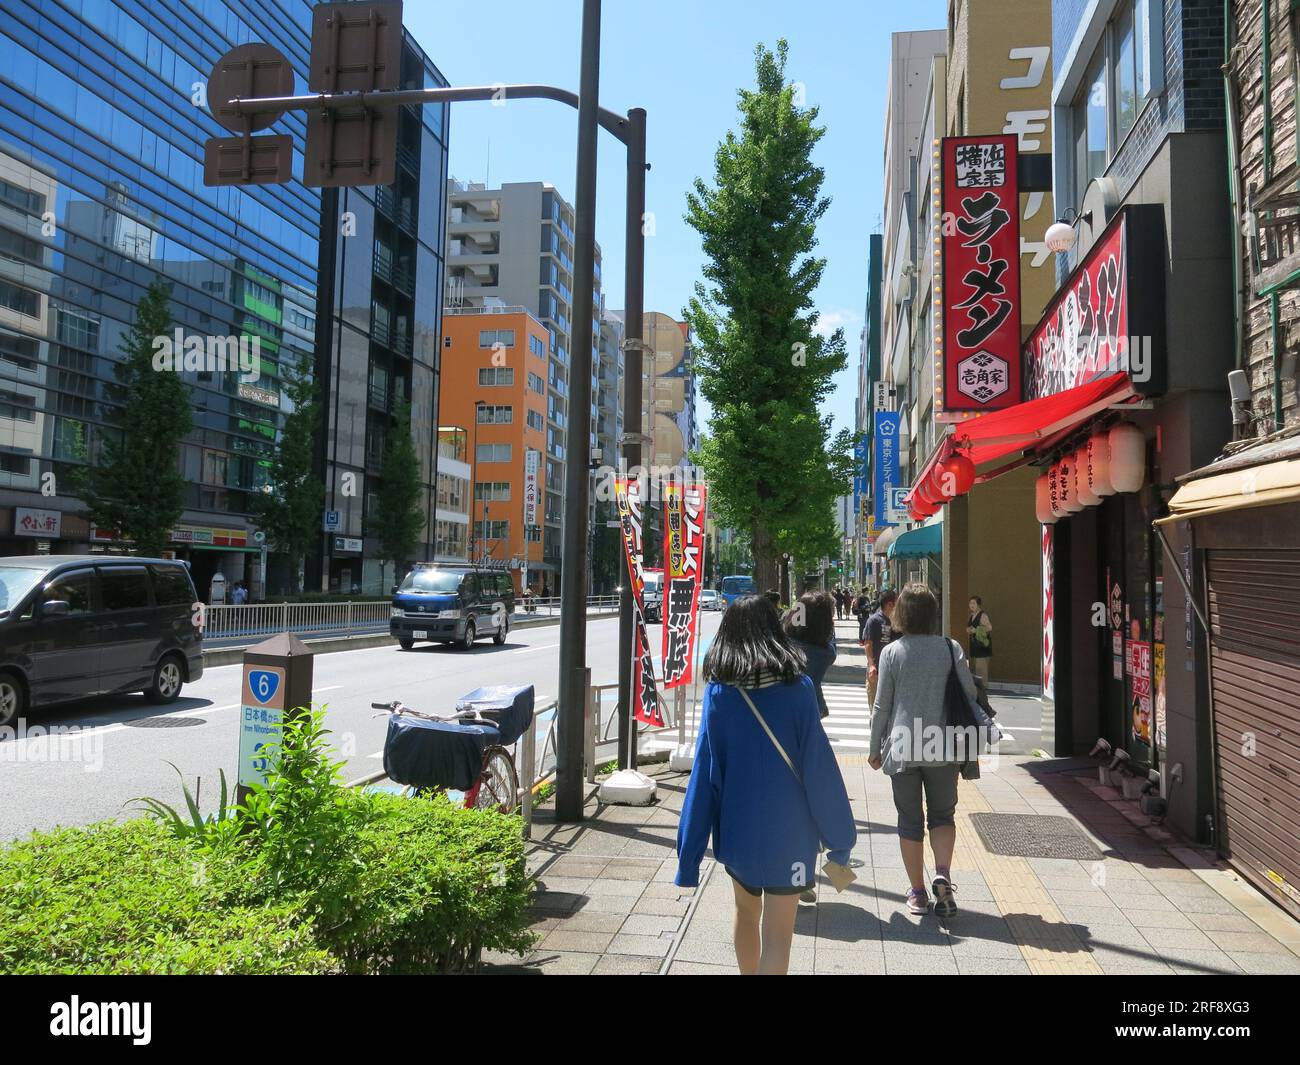 Modern Japan: view of a street scene in the Tokyo metropolis with tall buildings and pedestrians walking along the pavement. Stock Photo